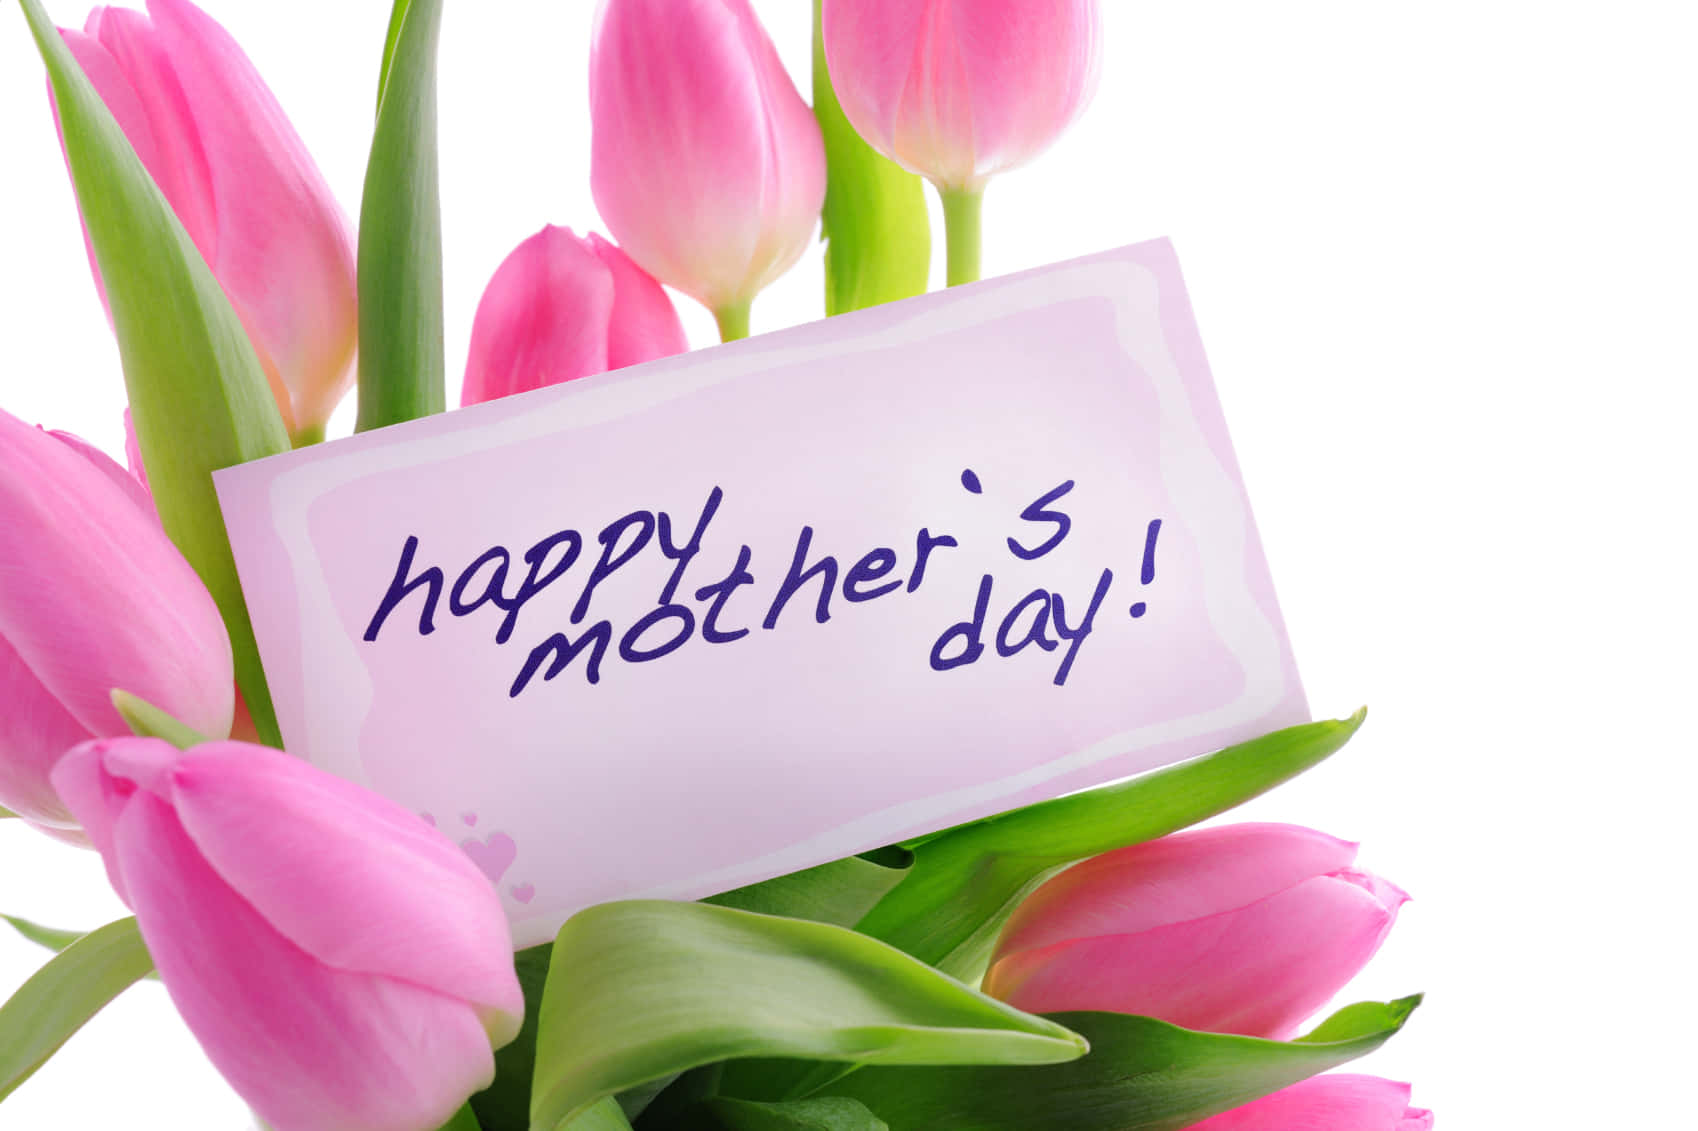 Celebrate Mom this Mothers Day